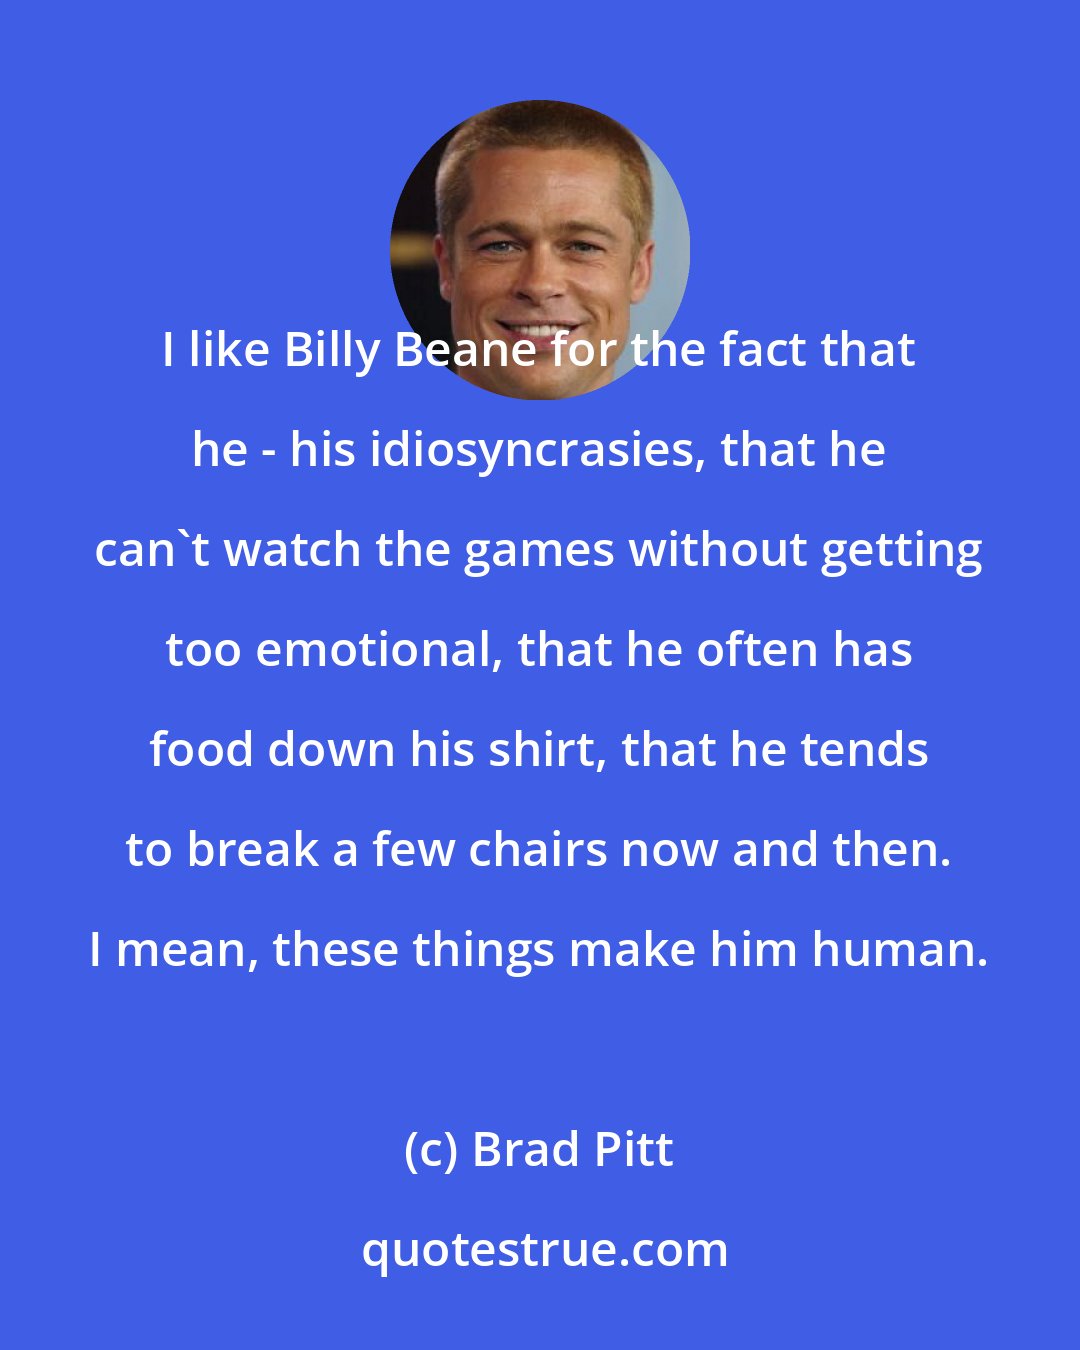 Brad Pitt: I like Billy Beane for the fact that he - his idiosyncrasies, that he can't watch the games without getting too emotional, that he often has food down his shirt, that he tends to break a few chairs now and then. I mean, these things make him human.